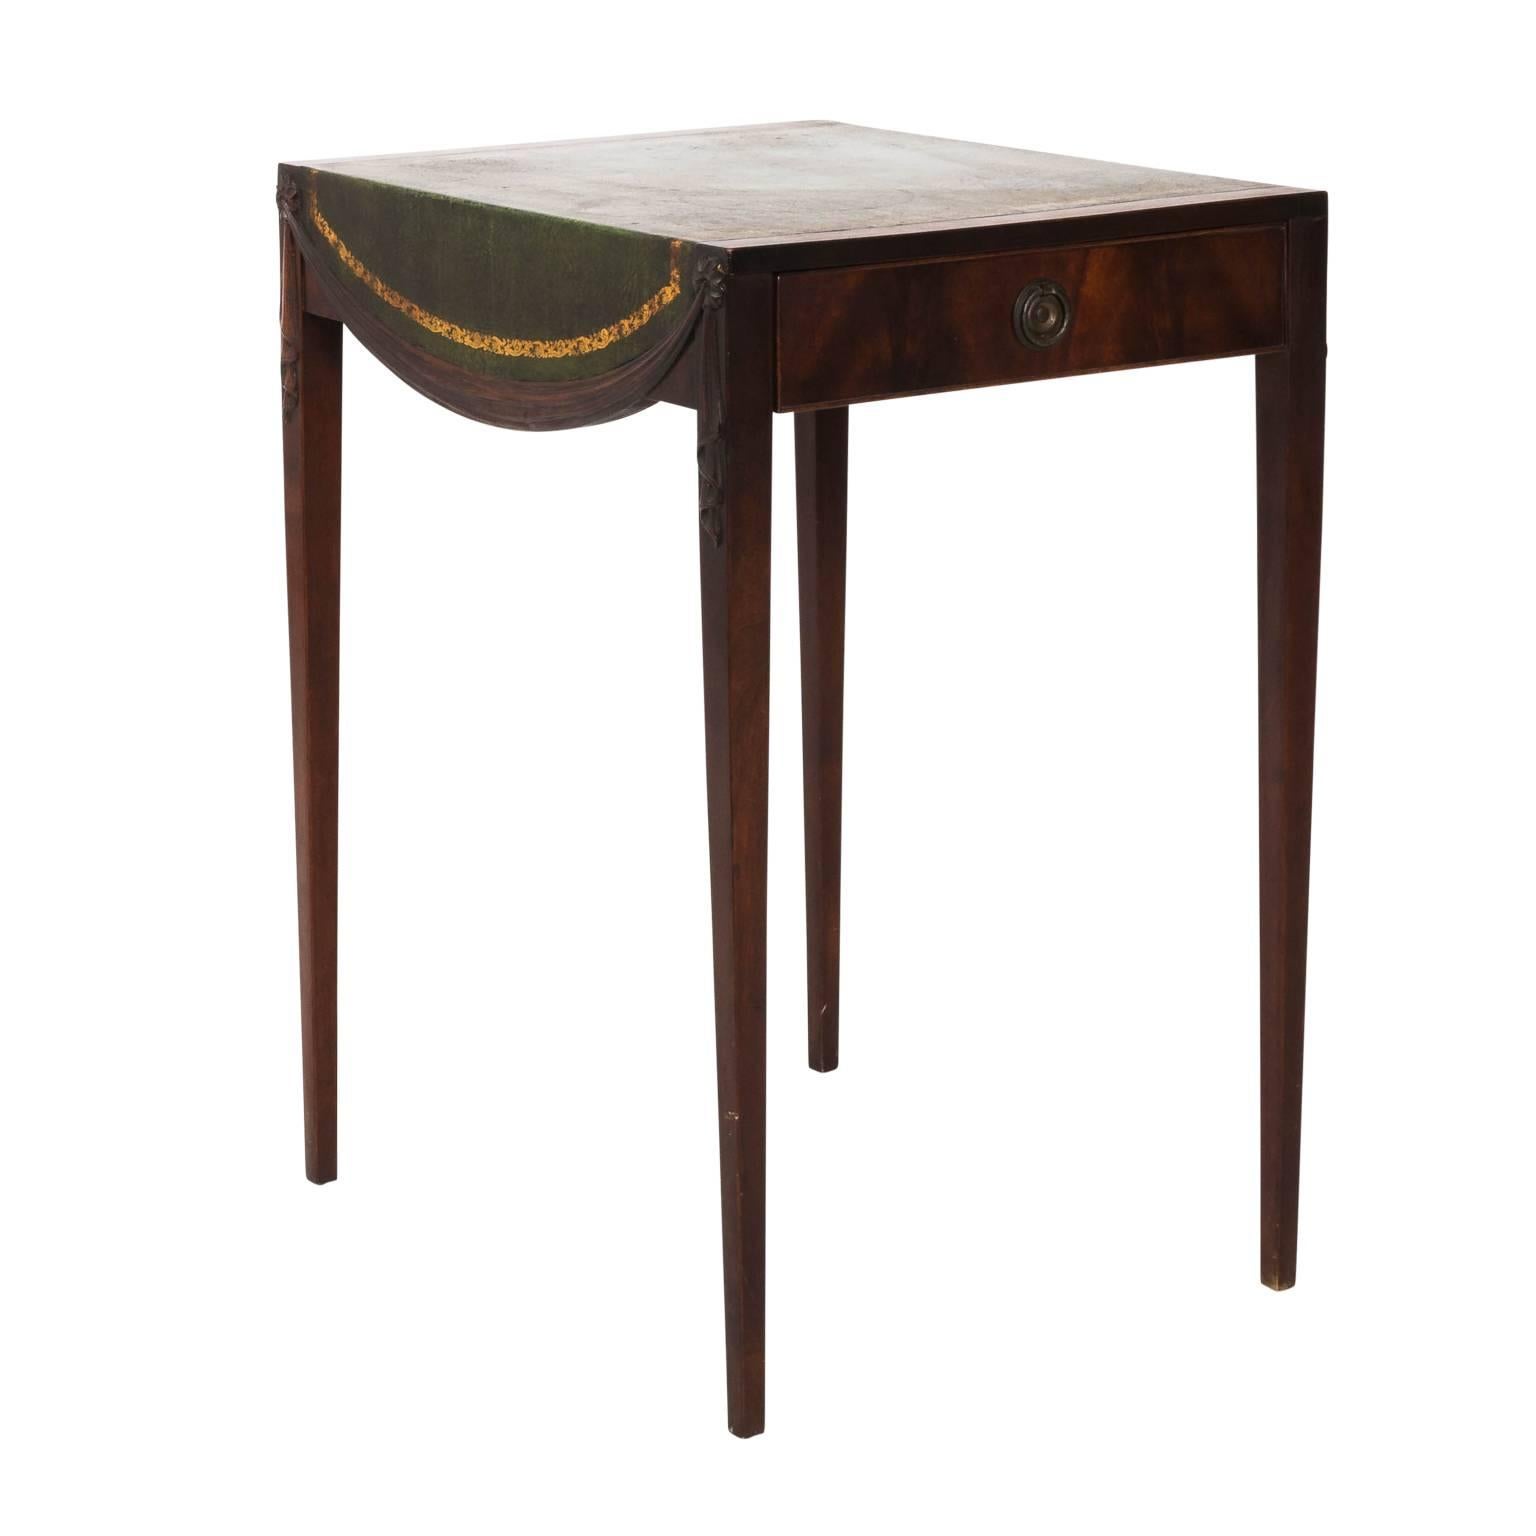 Pair of green tooled leather top side table by the Eckhardt-Barman Company with Mahogany swag carved trim draping the sides and square tapered legs, circa 1940. This piece also features embossed foliage detail on the leather top.